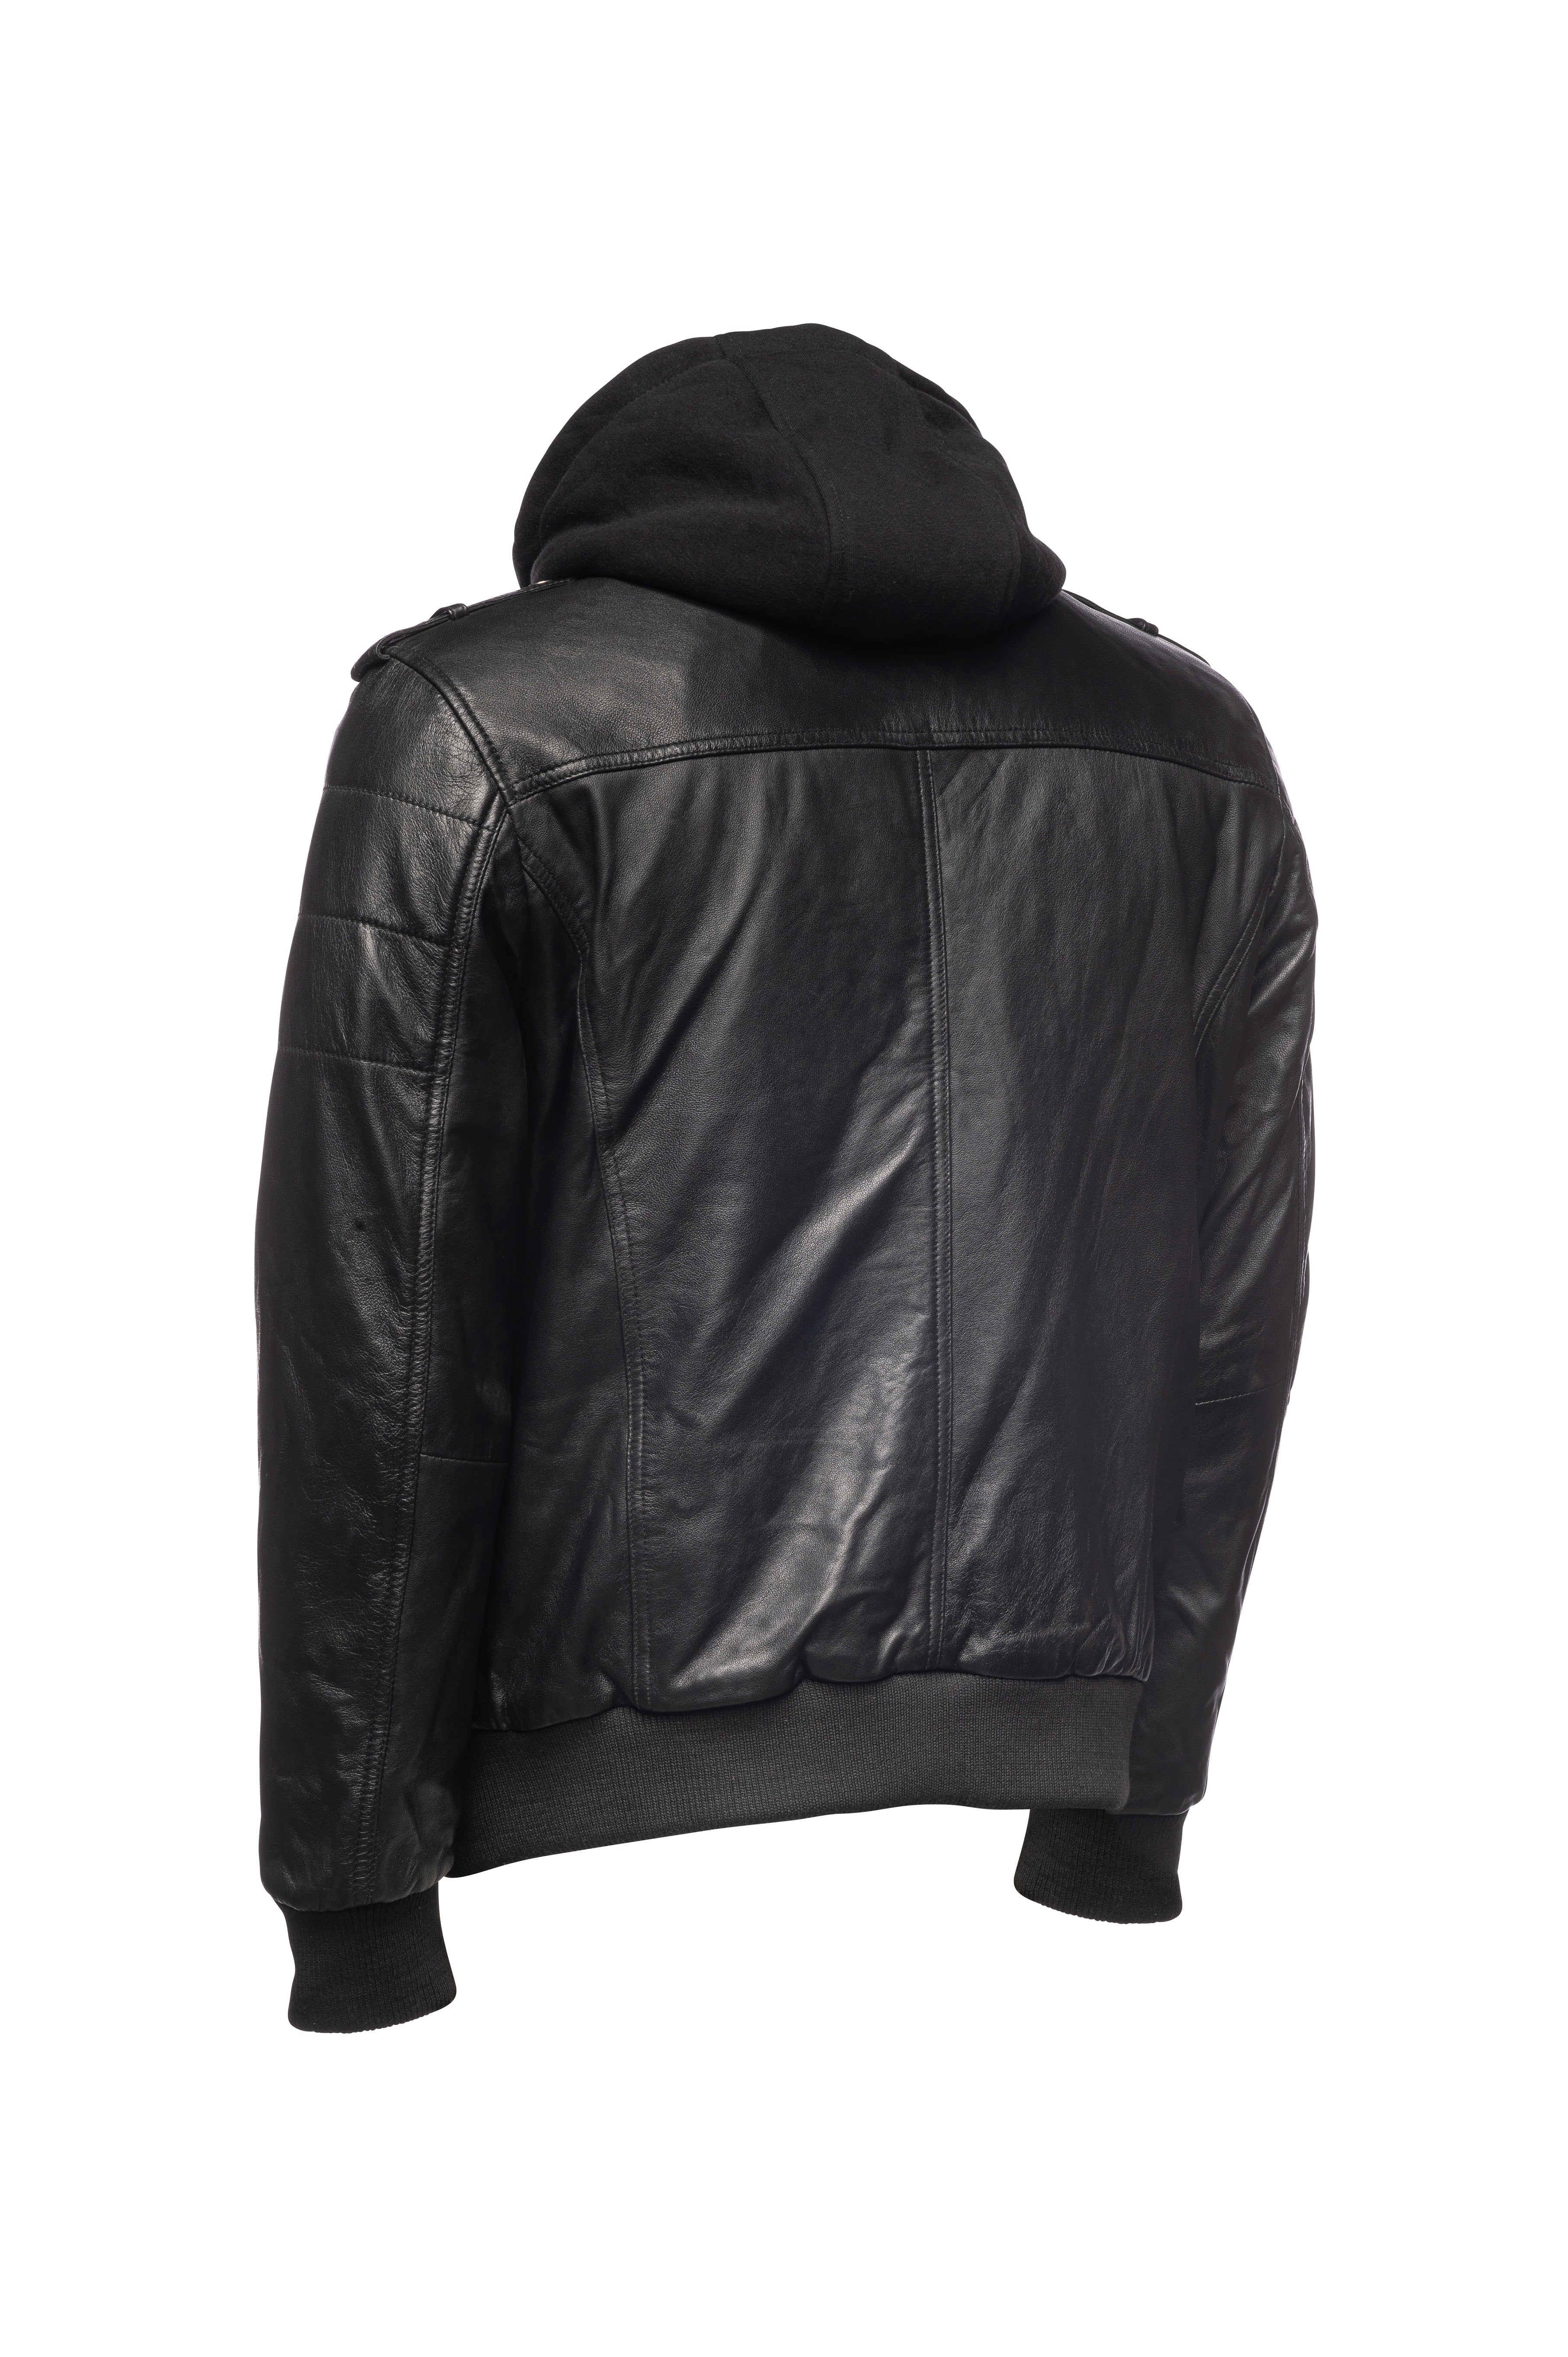 Mens Black Leather Bomber Jacket - Real Leather Jacket with Hood by FJackets